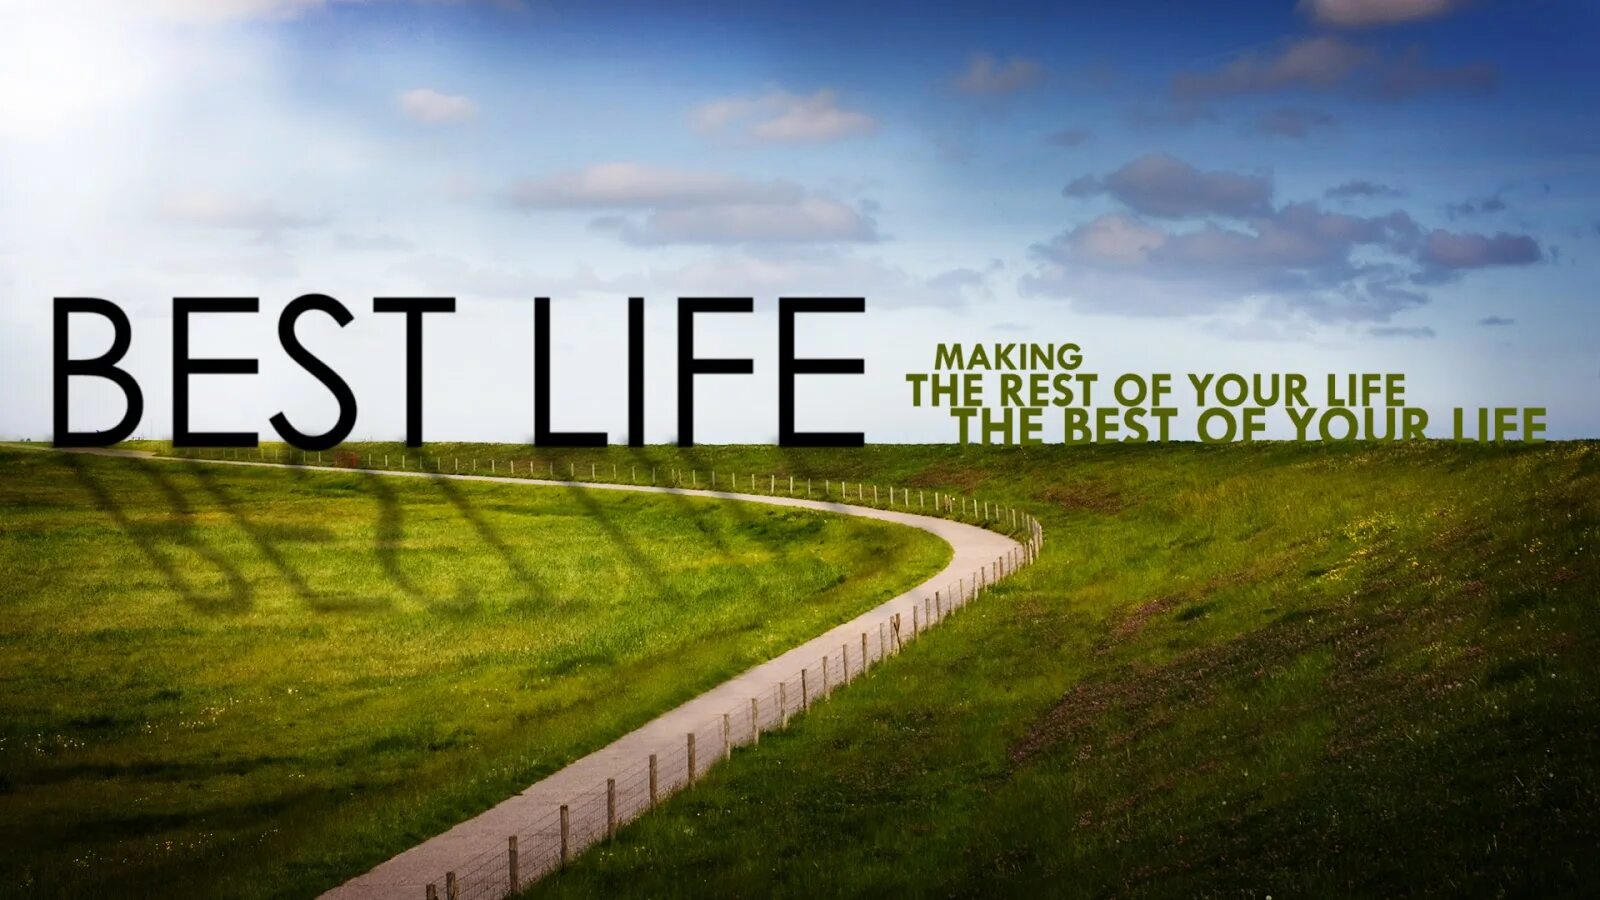 Rest of your life. Better Life. Living best Life. Christian Life a best Life. Well of Life.